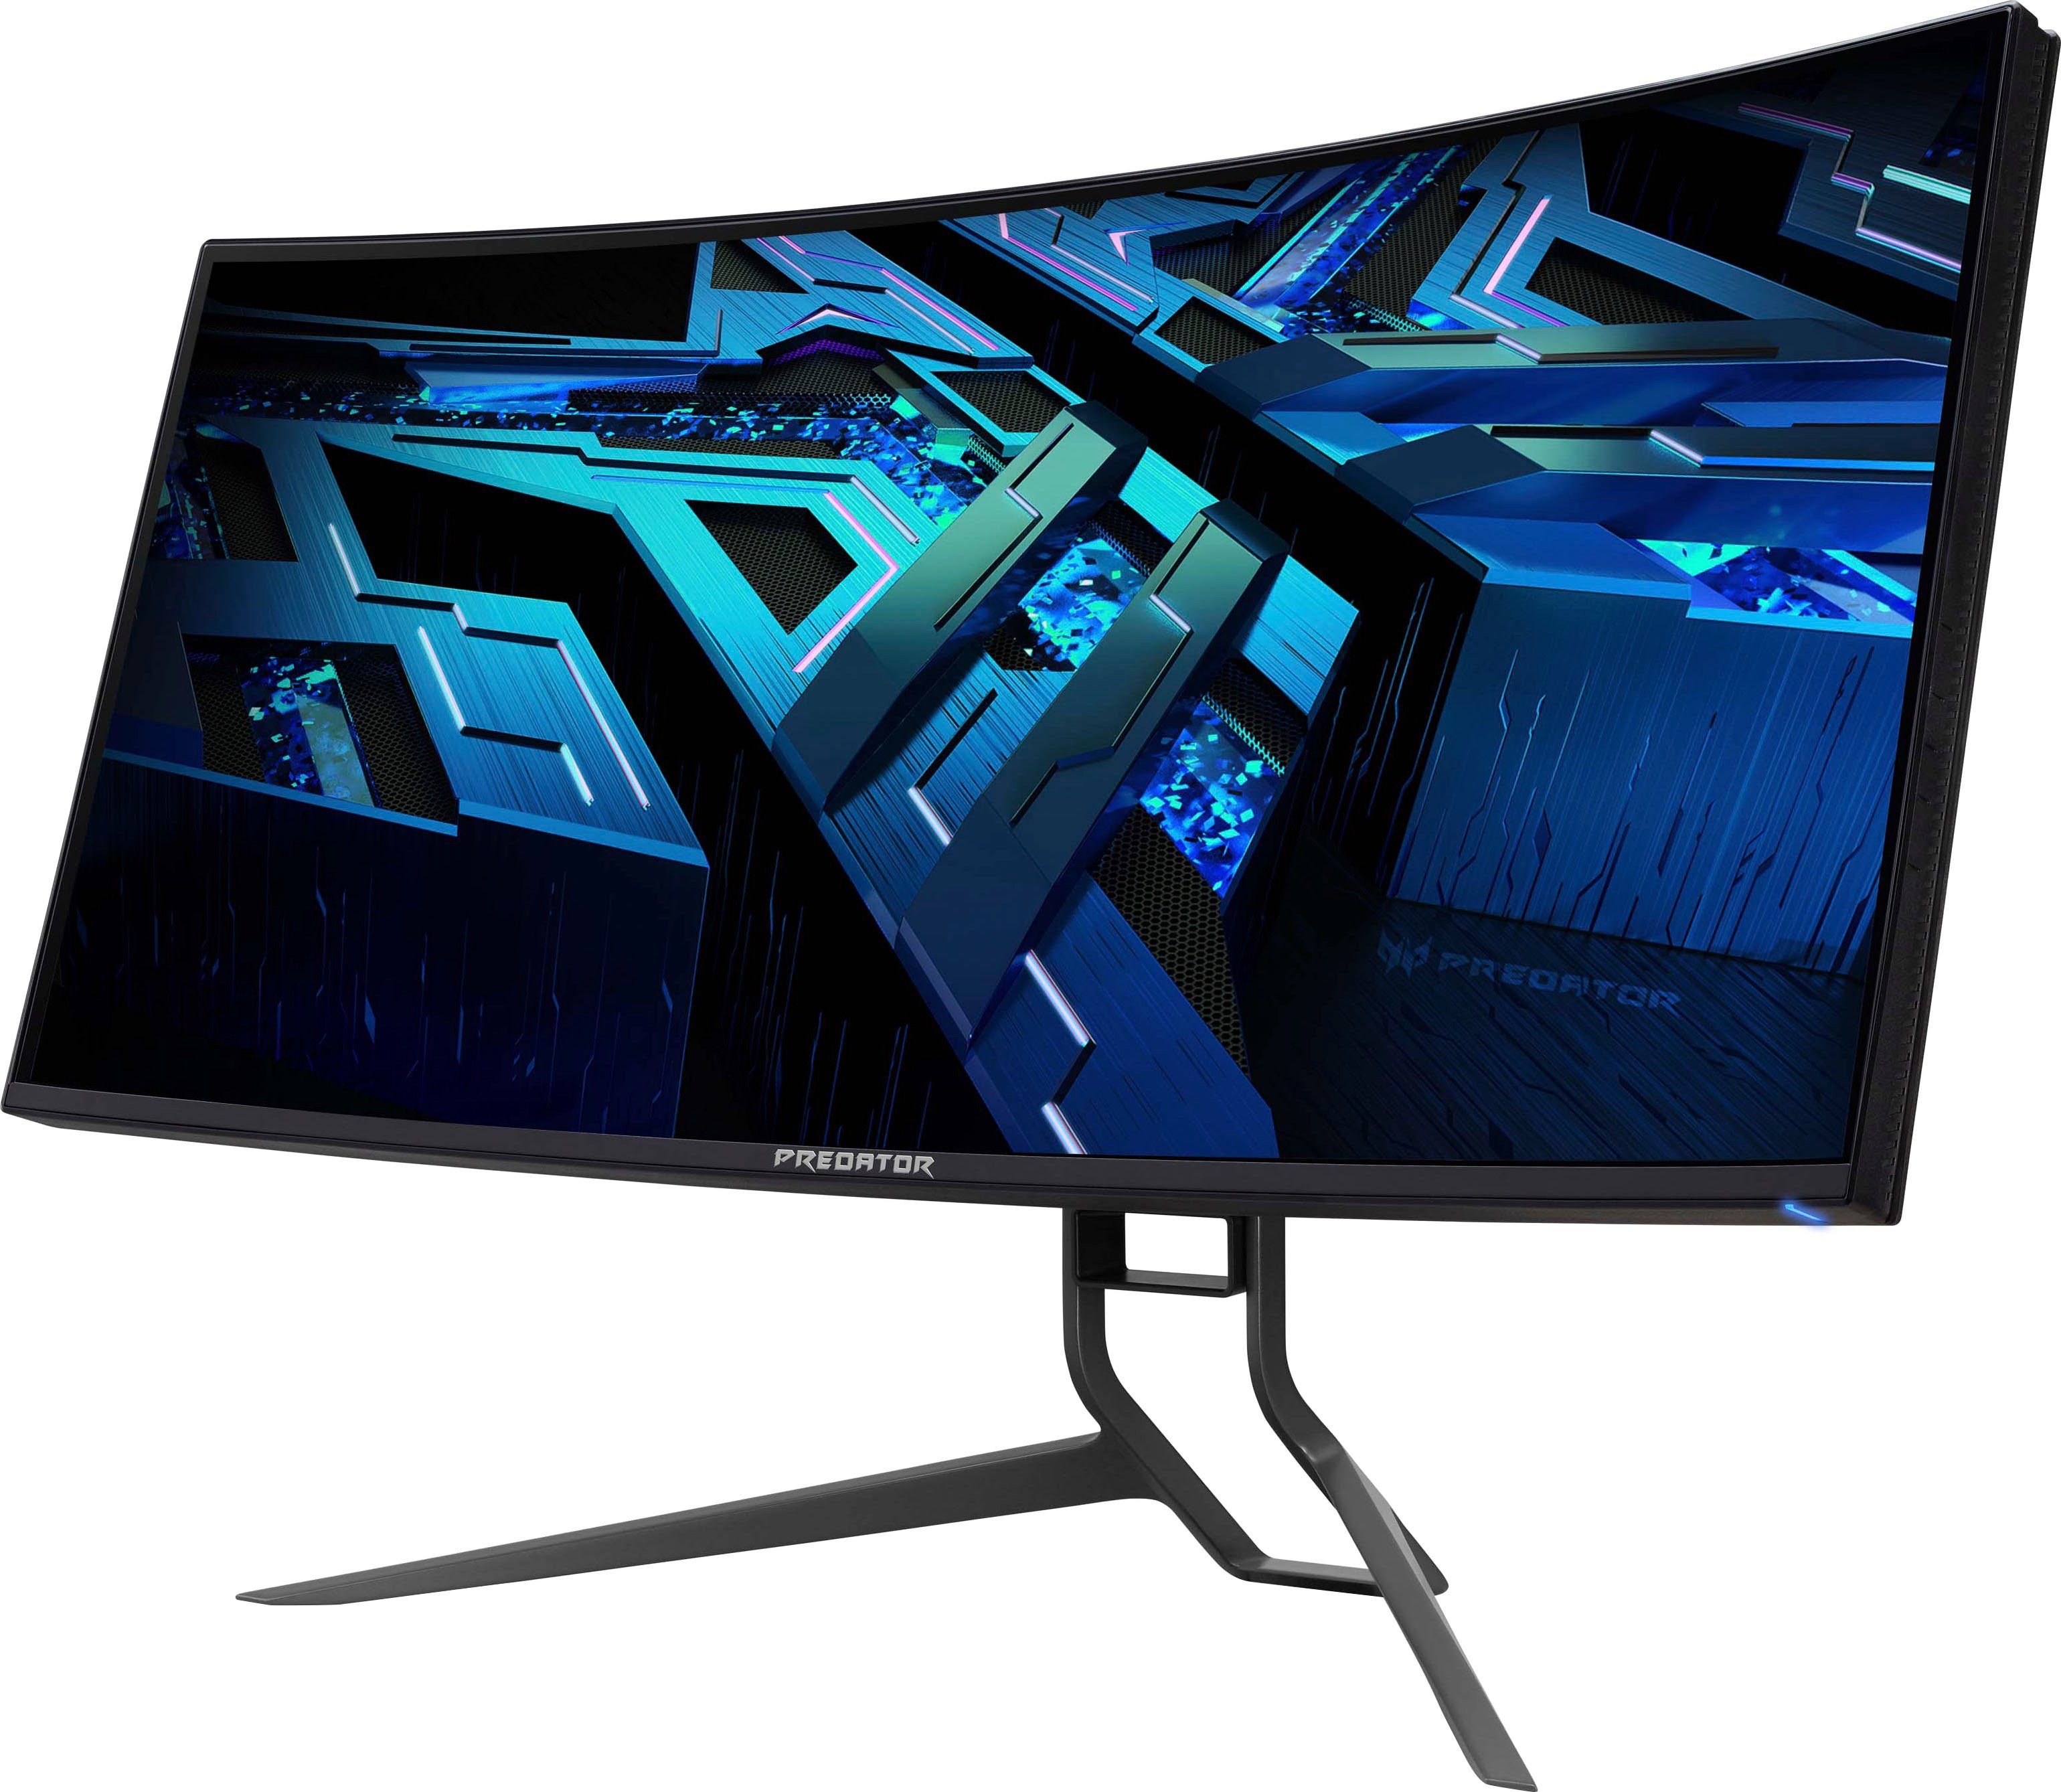 IPS-LED) ms (86,4 0,5 px, Acer 1440 3440 ", Curved-Gaming-LED-Monitor Reaktionszeit, Hz, X34GS Predator cm/34 180 x